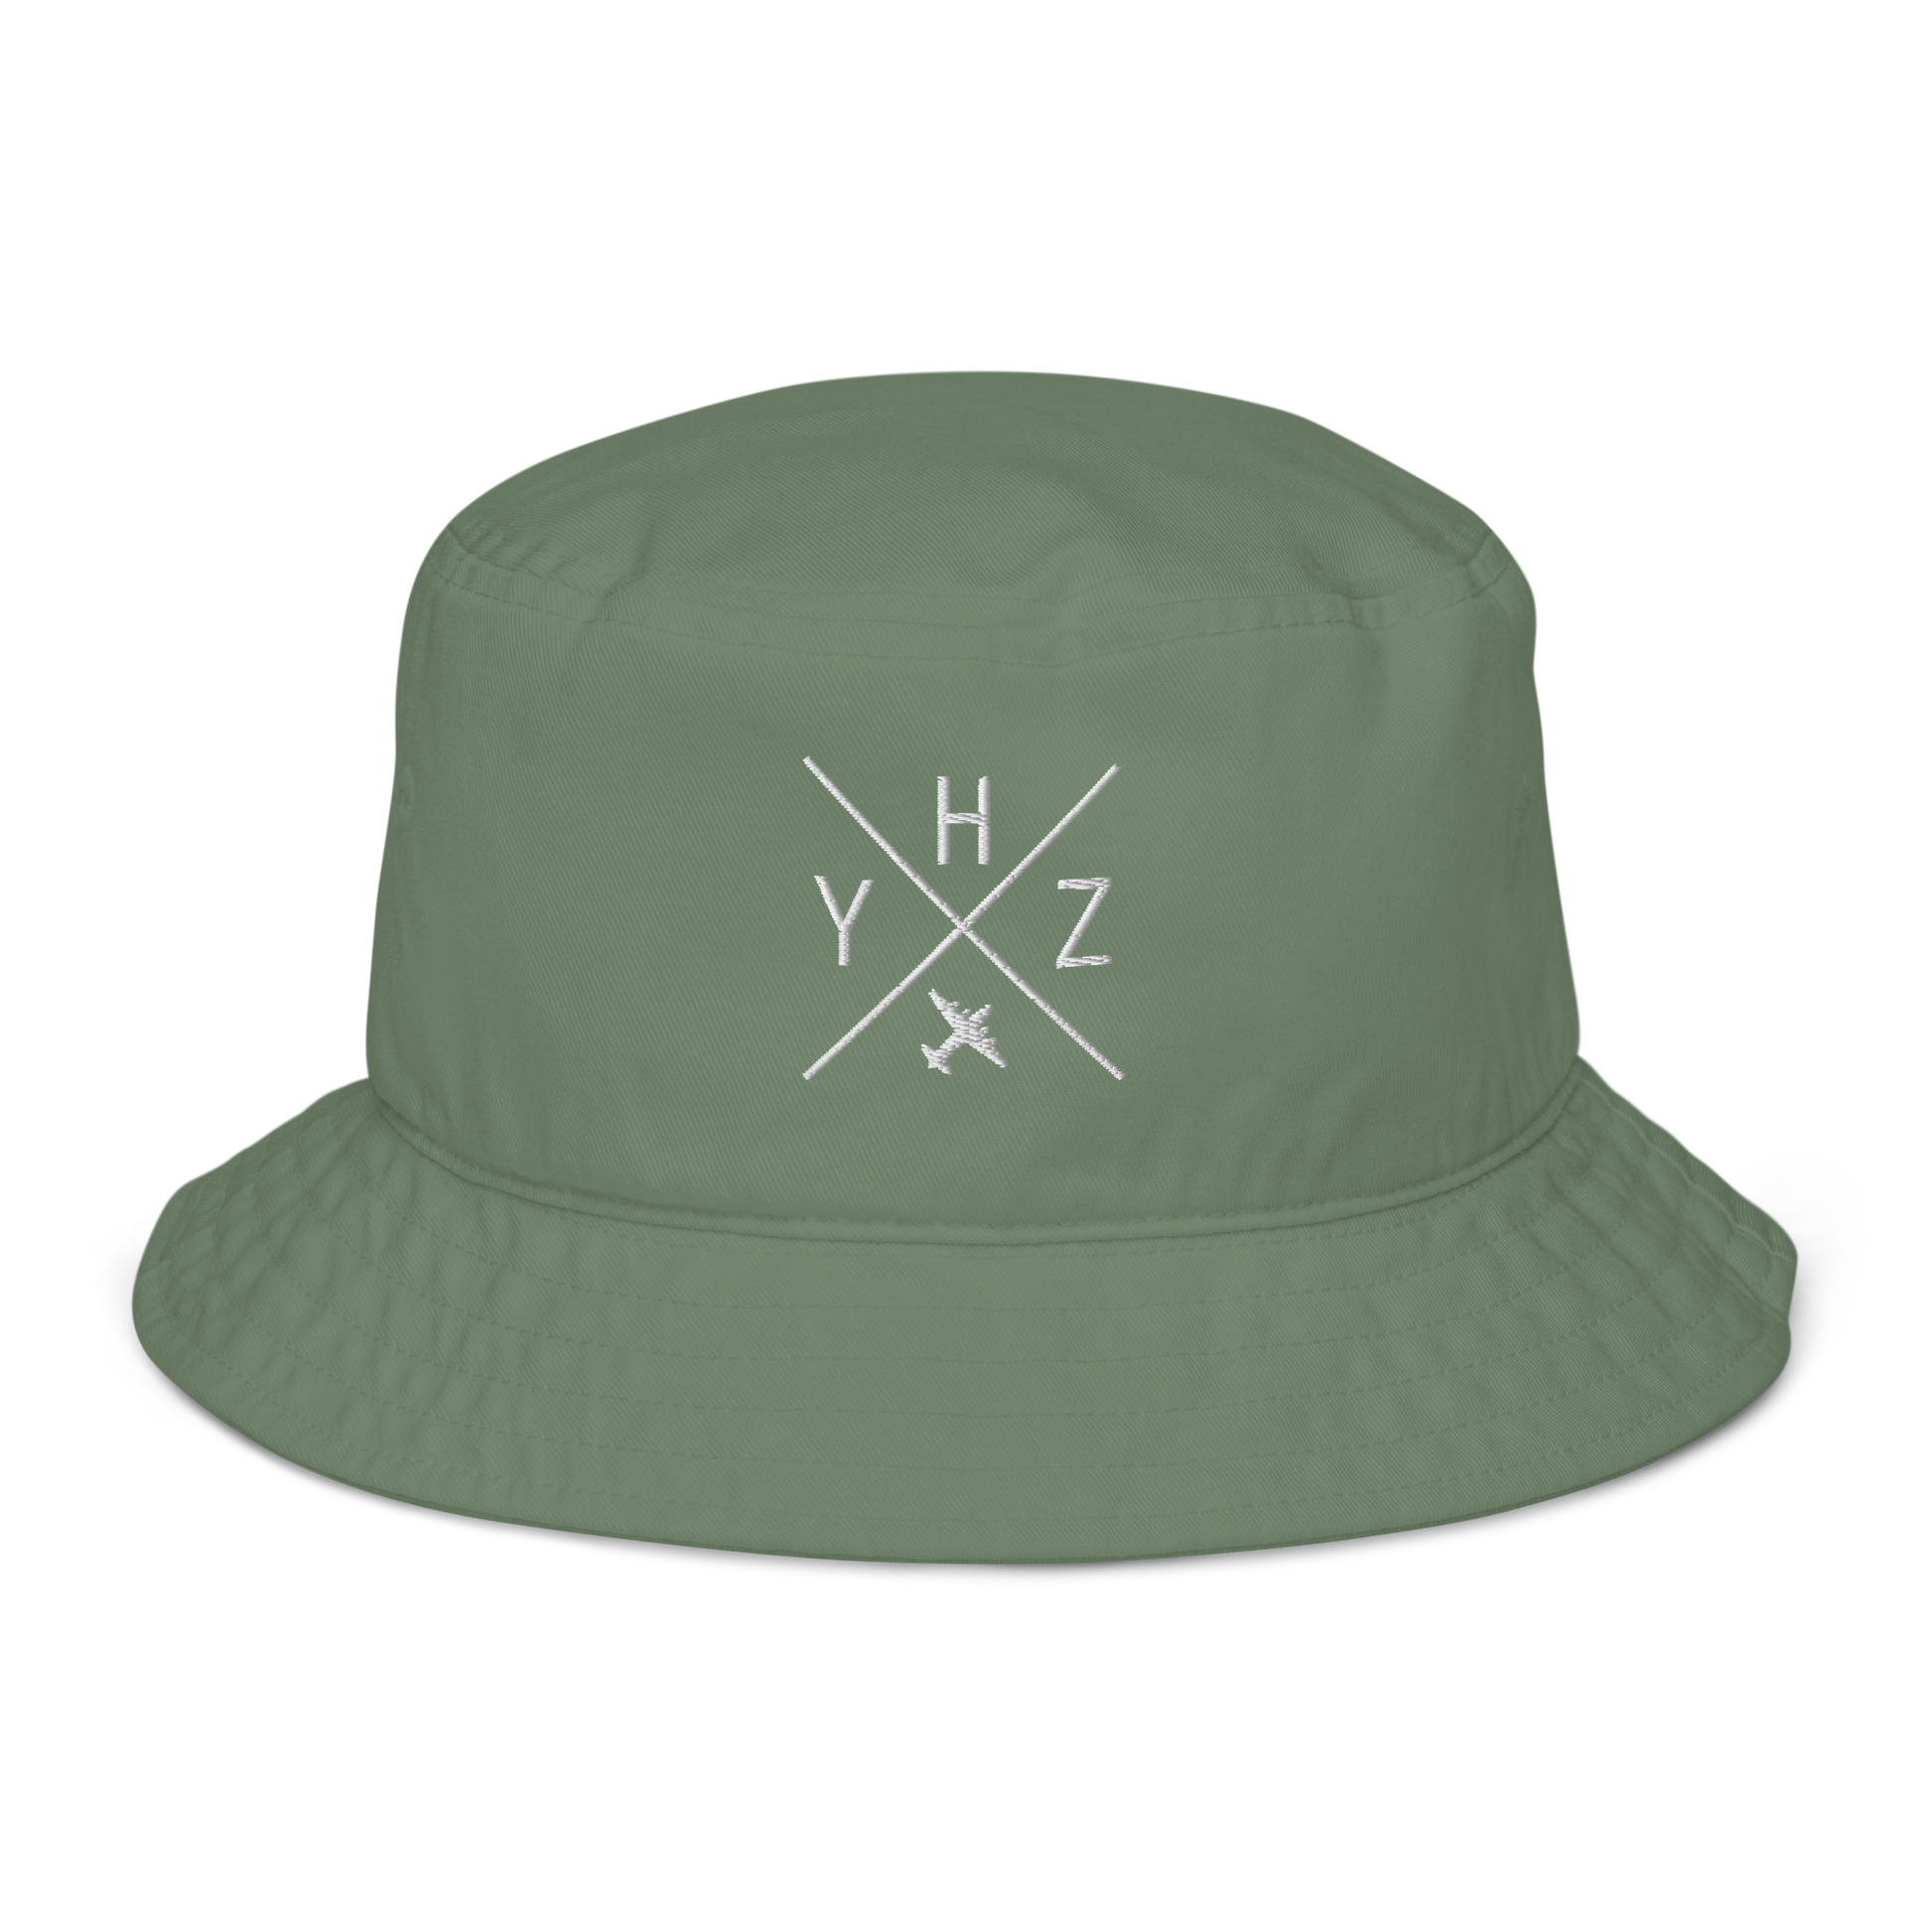 YHM Designs - YHZ Halifax Organic Cotton Bucket Hat - Crossed-X Design with Airport Code and Vintage Propliner - White Embroidery - Image 06